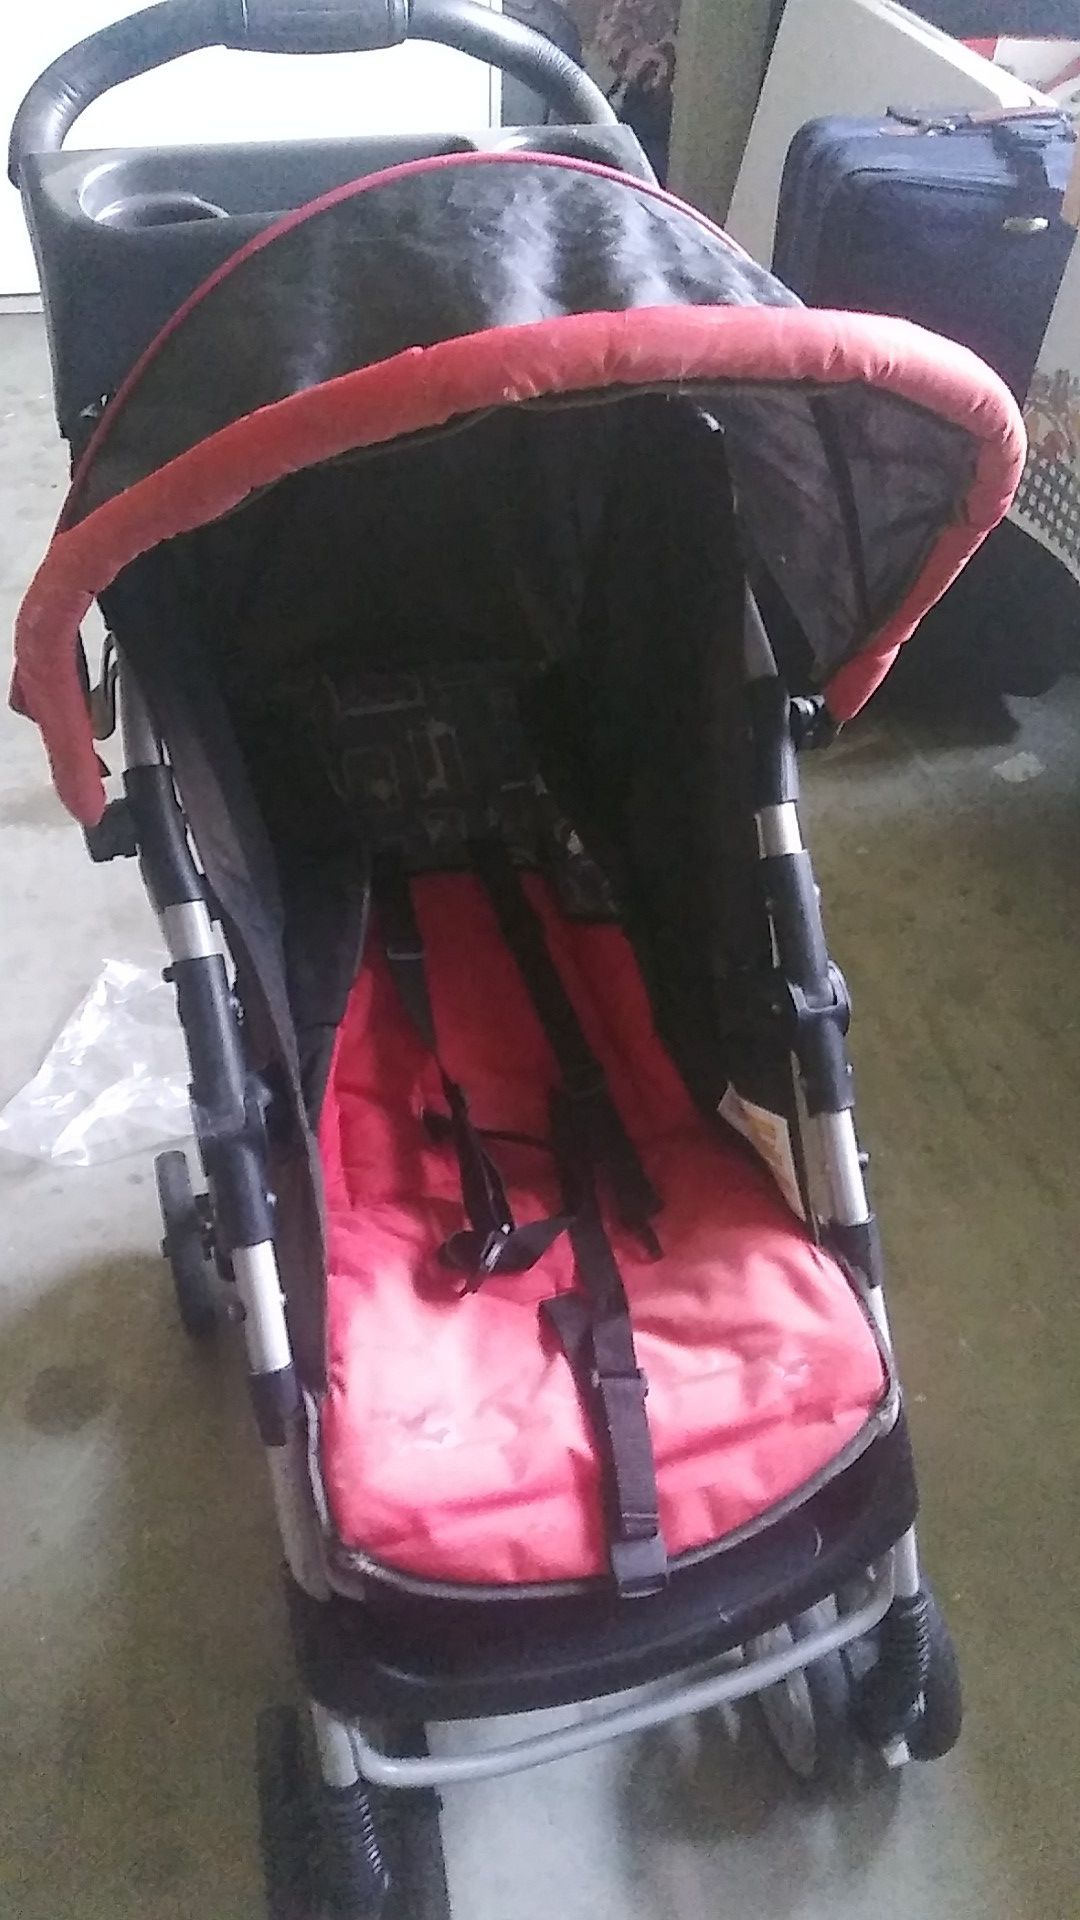 Free Stroller and car seat